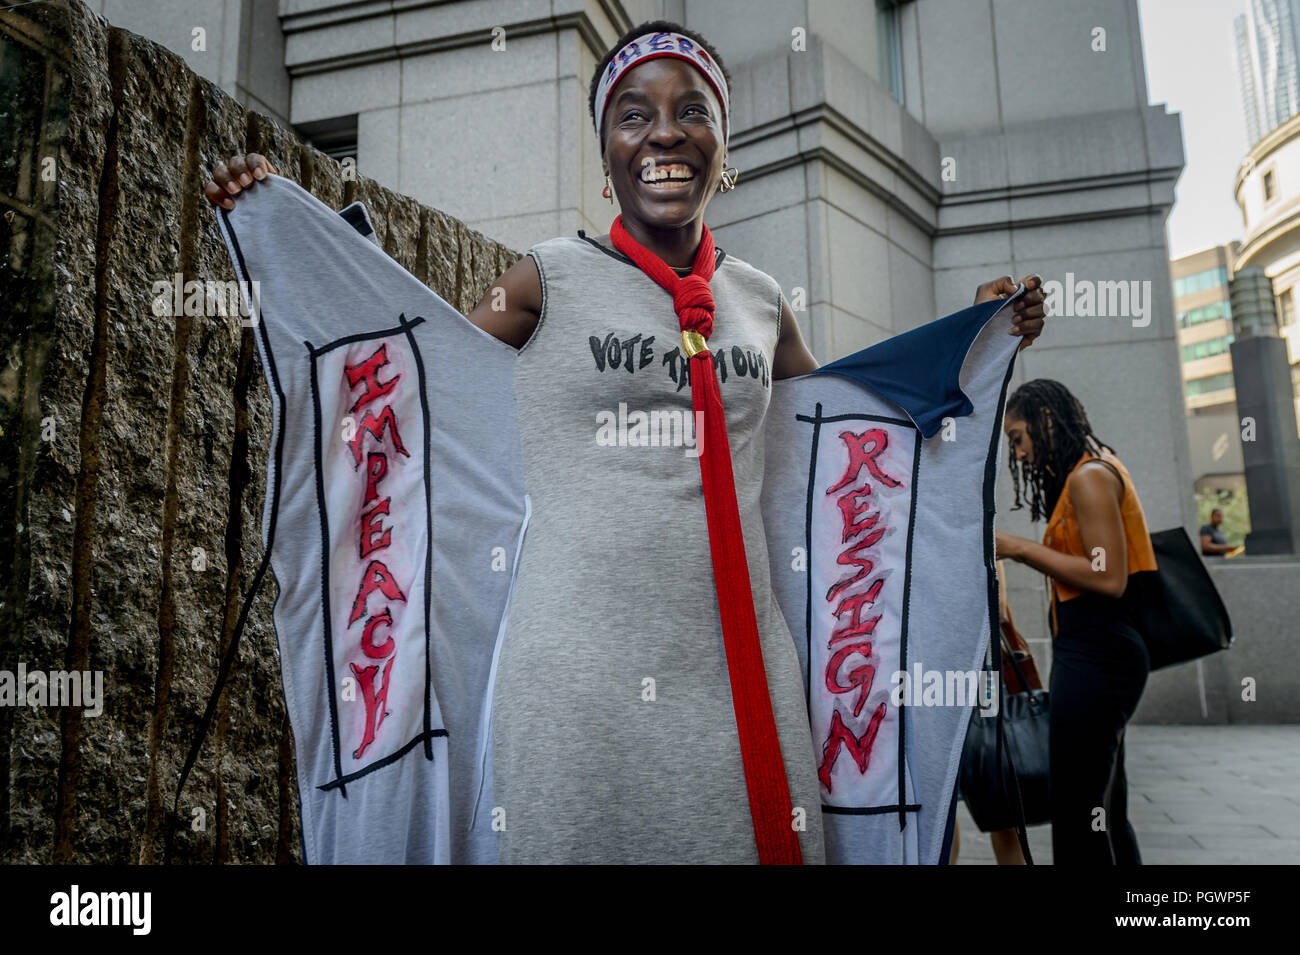 New York, United States. 28th Aug, 2018. Patricia Okoumou, Statue of Liberty climber - Patricia Okoumou, the woman who scaled the Statue of Liberty, headed back to court on August 28, 2018 for a procedural hearing to schedule Okoumou's trial date for early November. Credit: Erik McGregor/Pacific Press/Alamy Live News Stock Photo